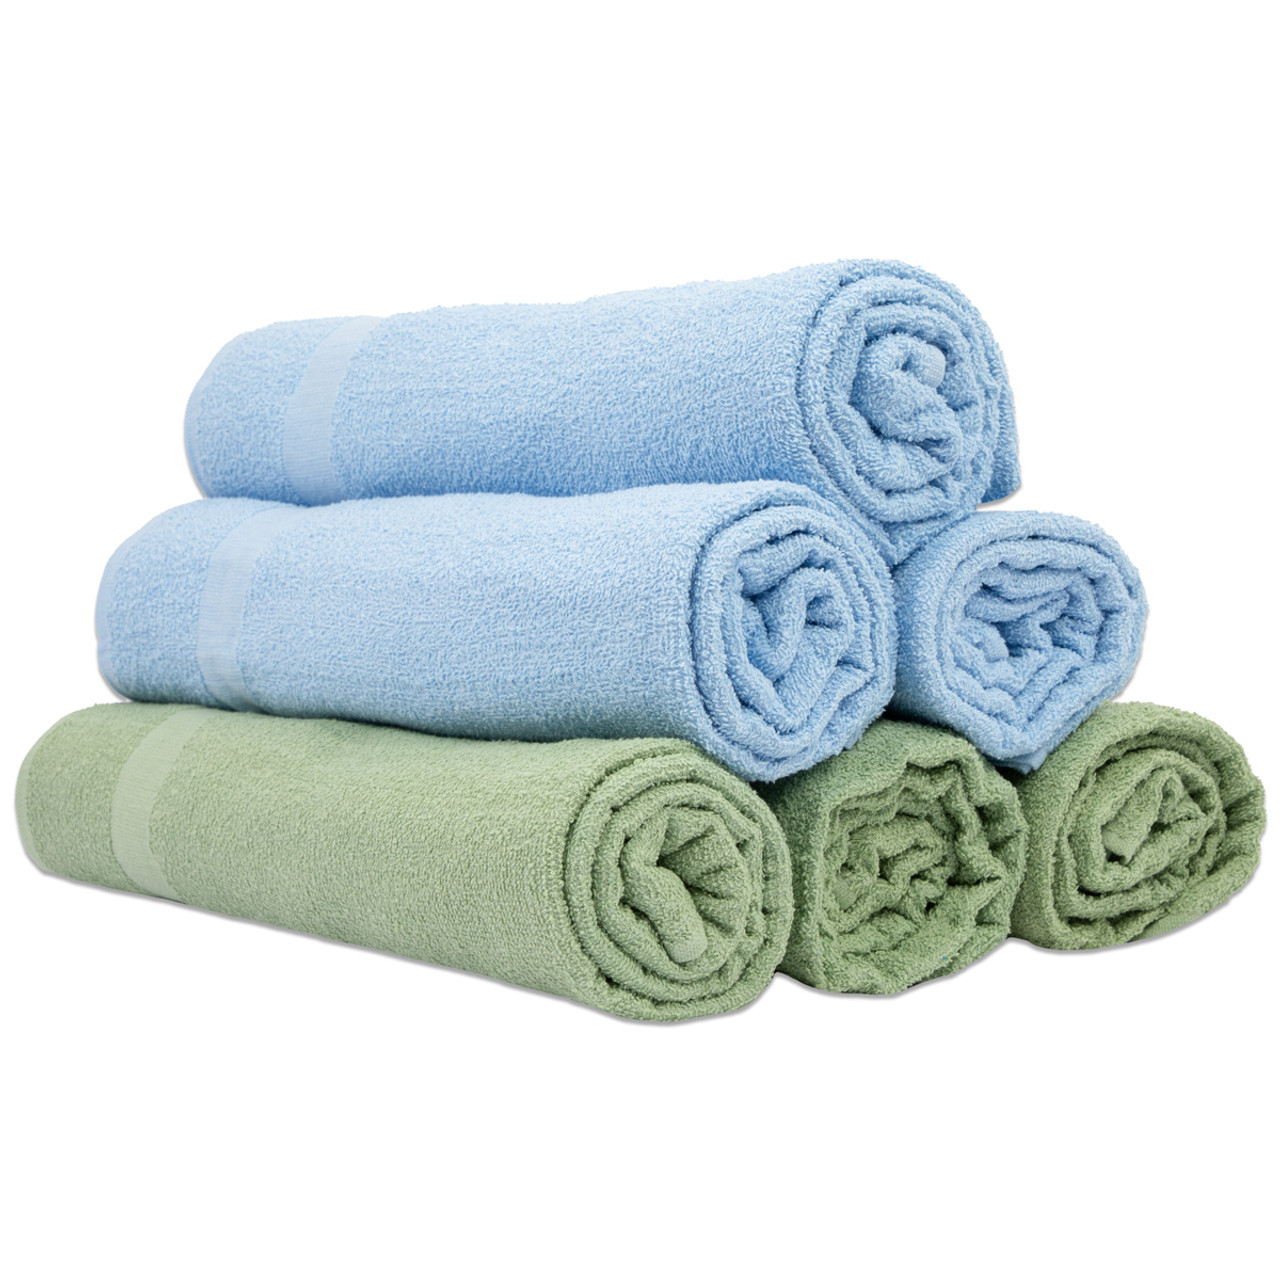 Wholesale Cotton Terry Pool Towels 36x68